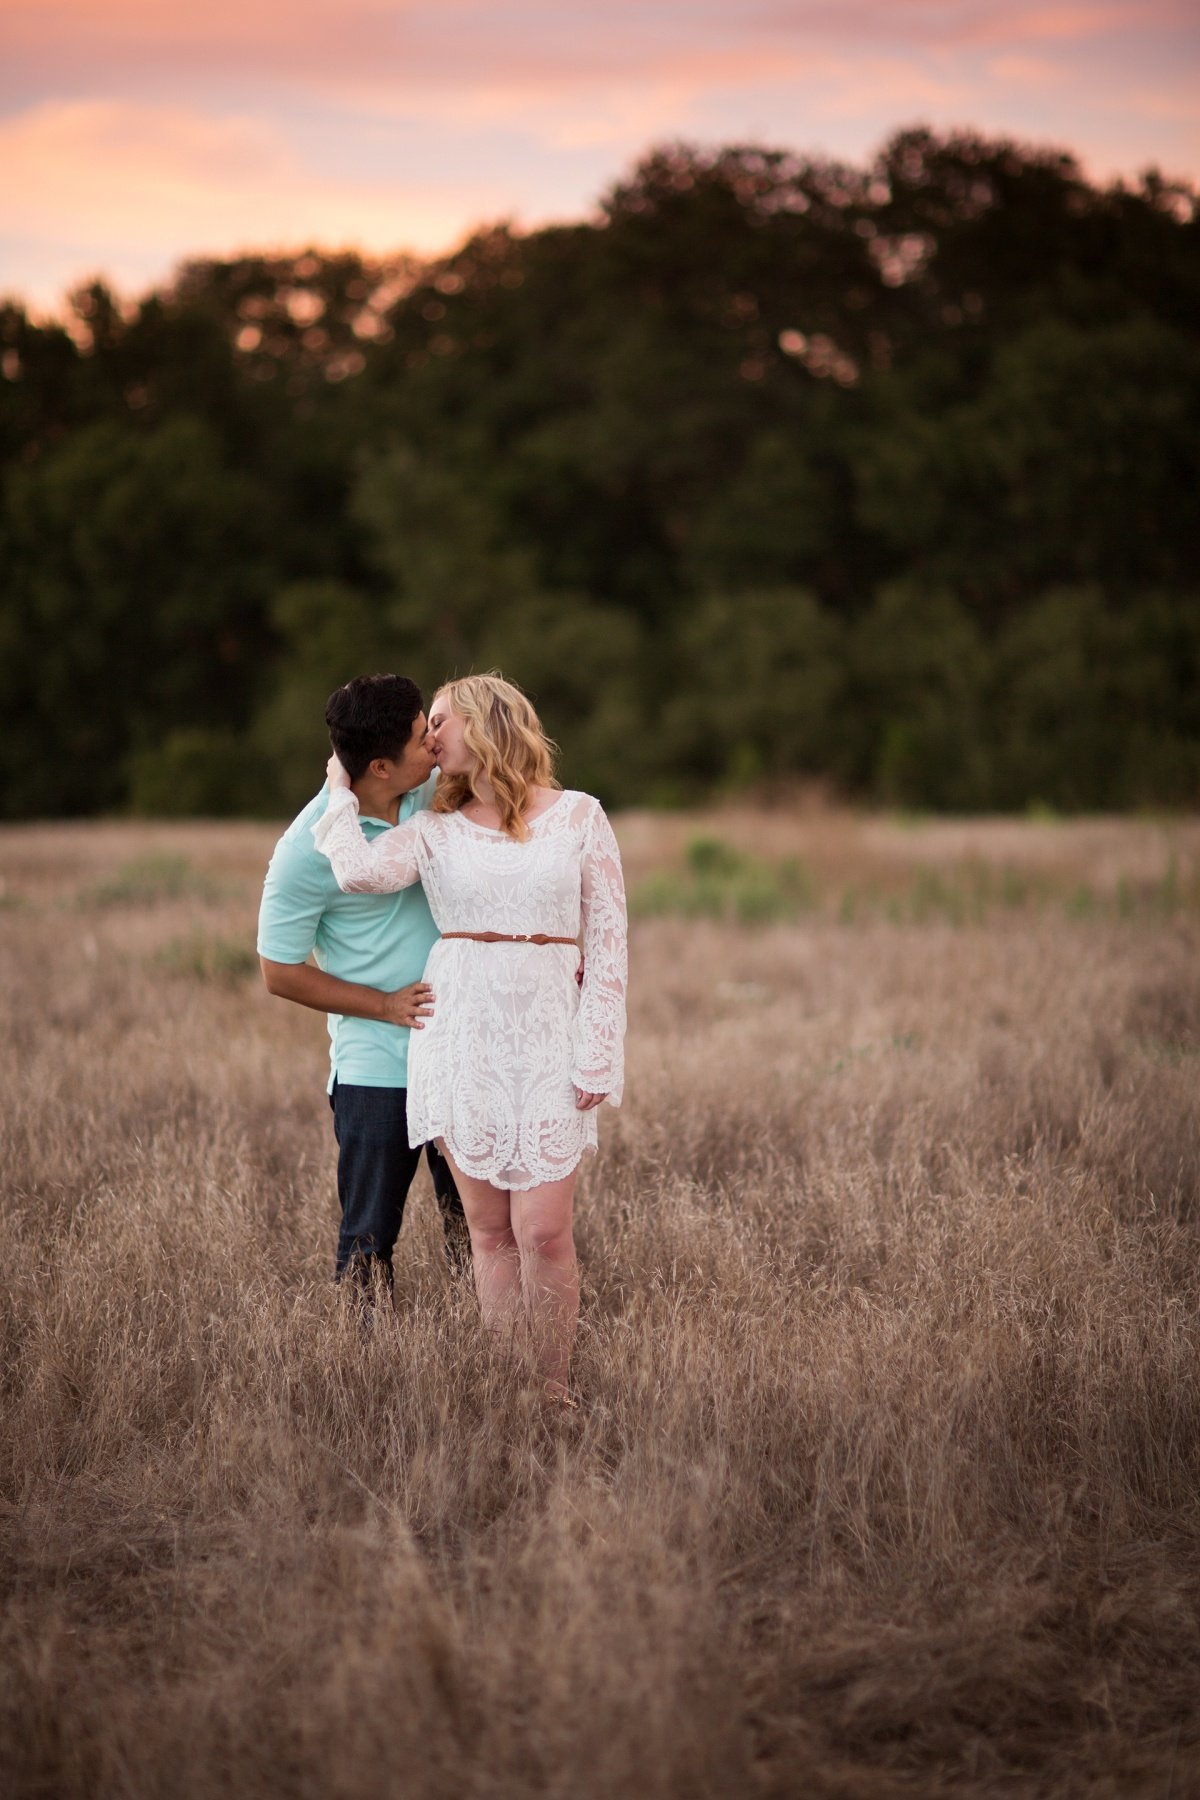 Groom to be looks around his Bride and they share a kiss as he holds her hip during photo session in an open field of brush